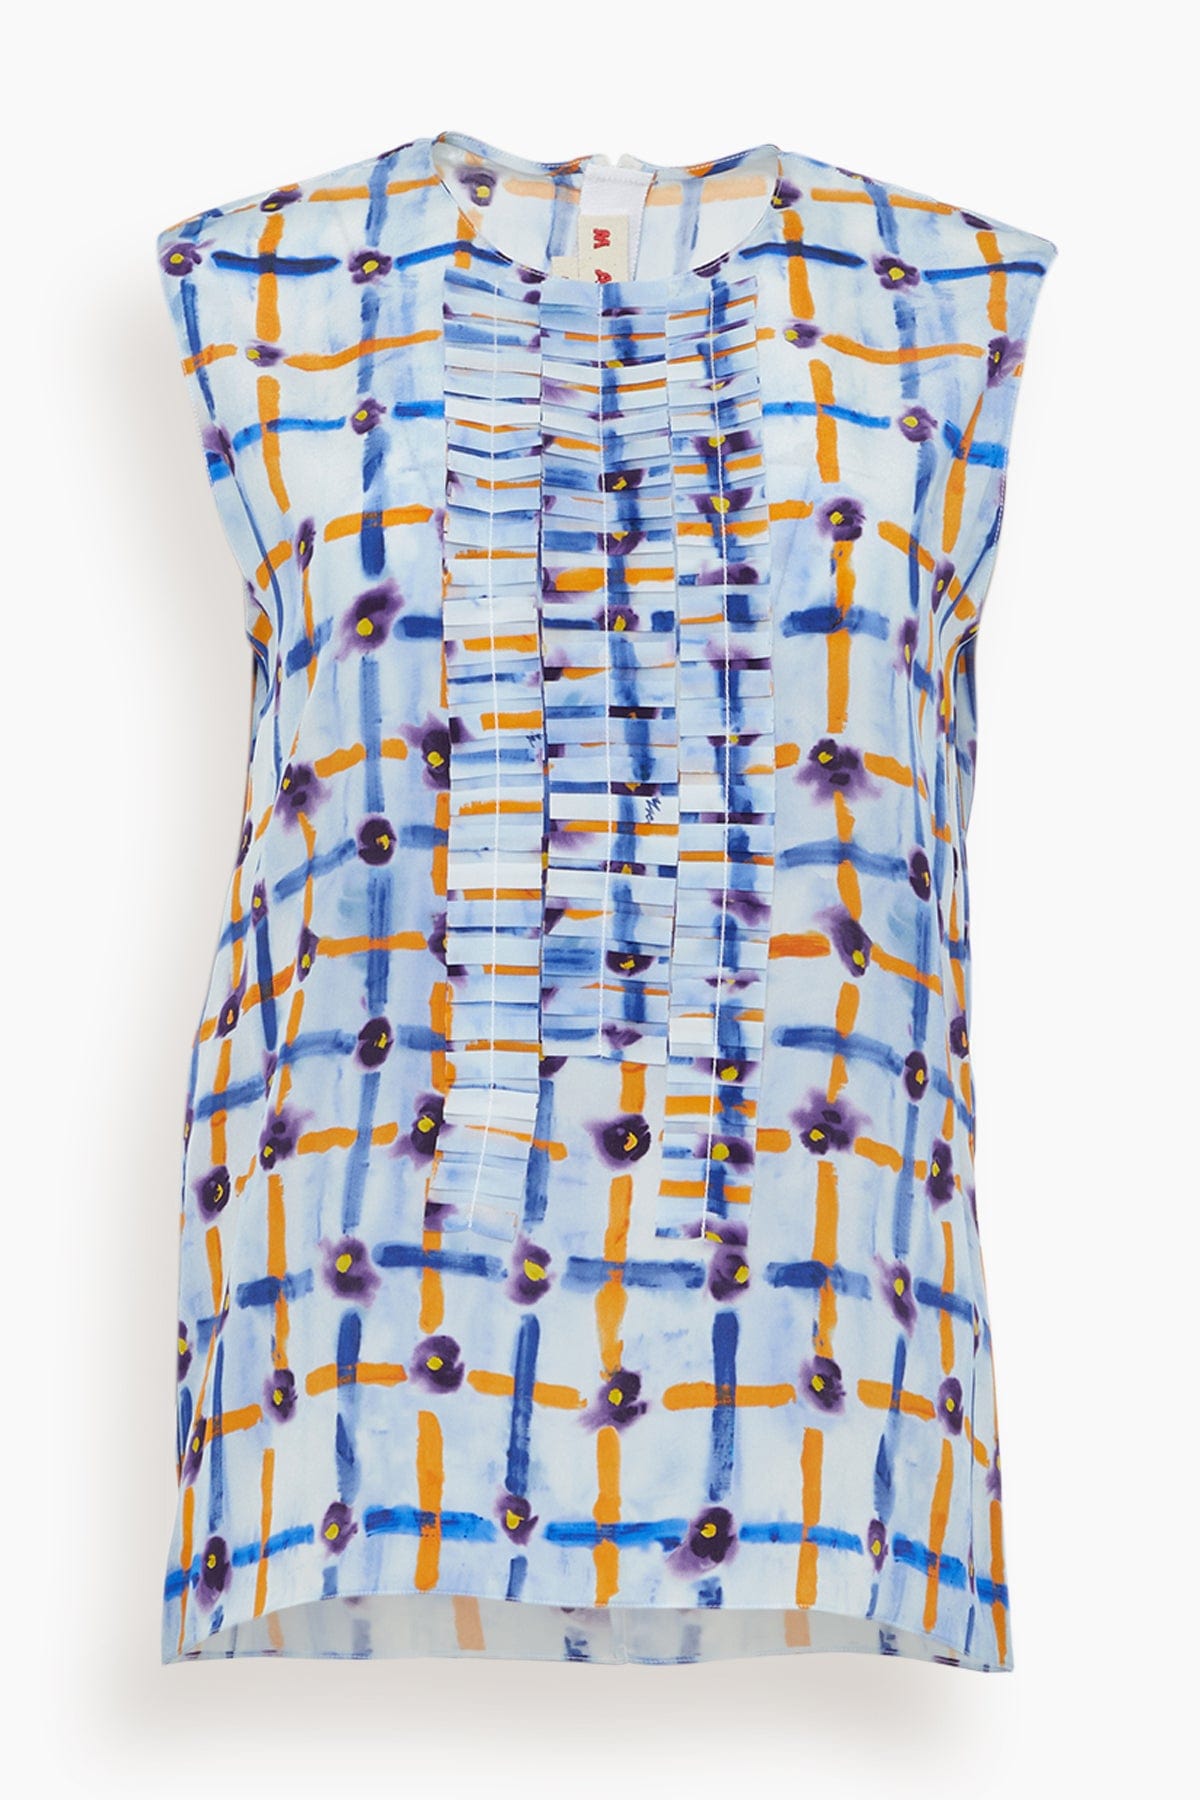 Marni Tops Saraband Crepe de Chine Top in Light Blue